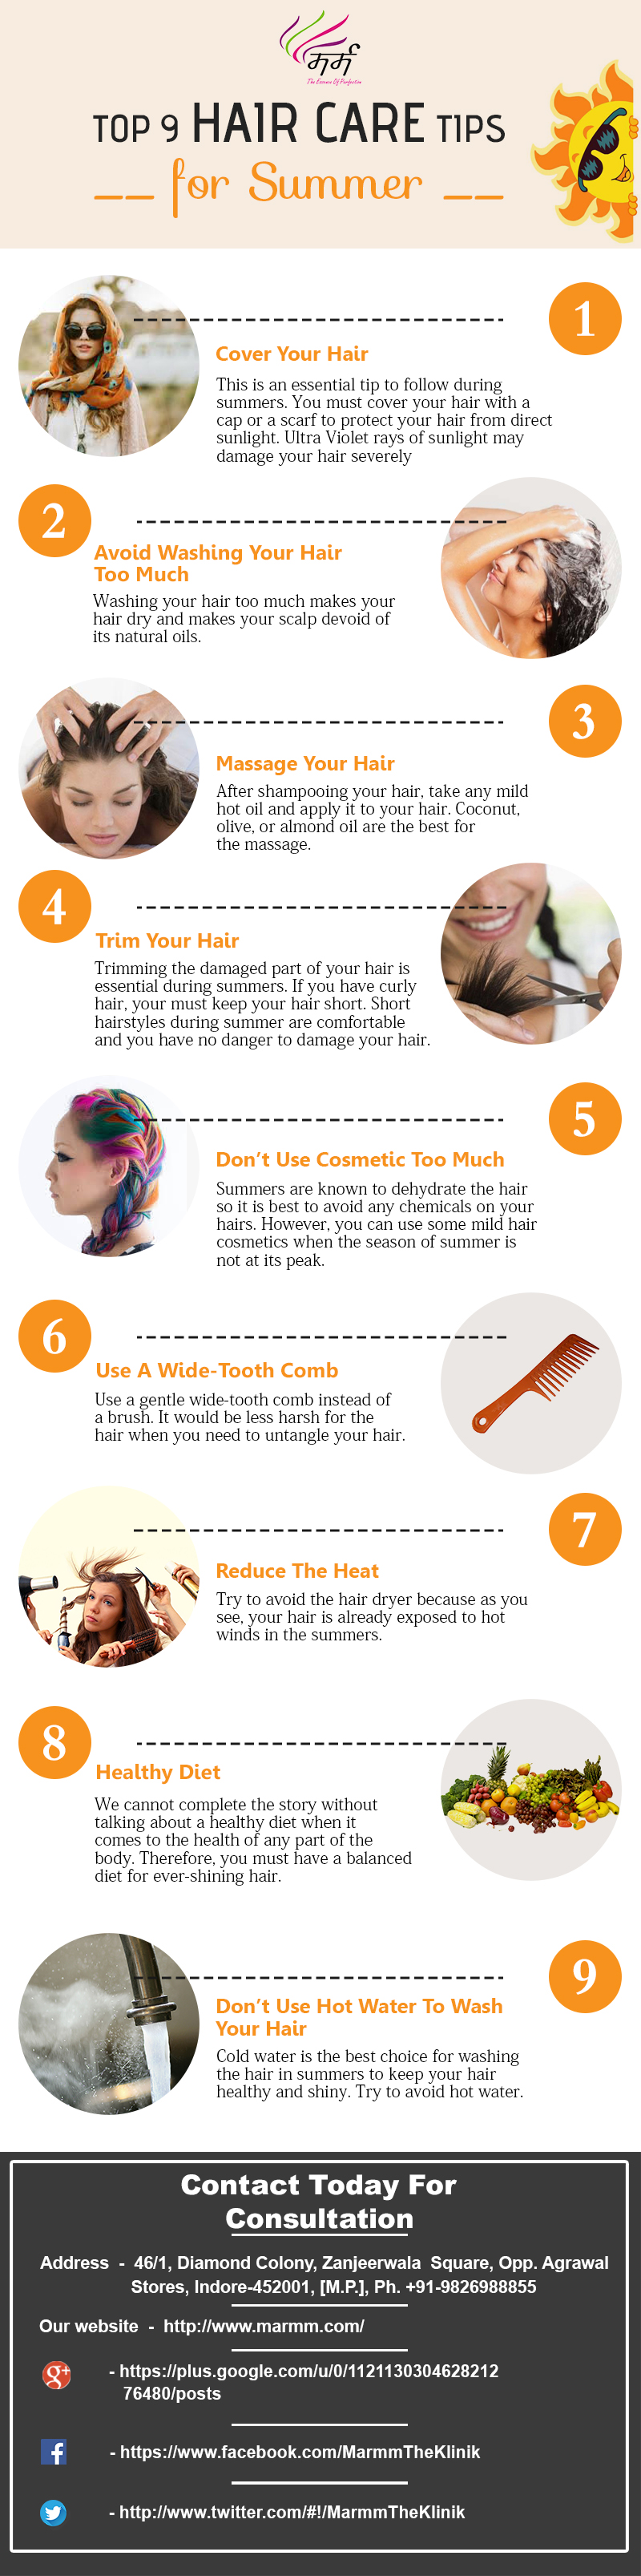 Top 10 Hair Care Tips For Summer